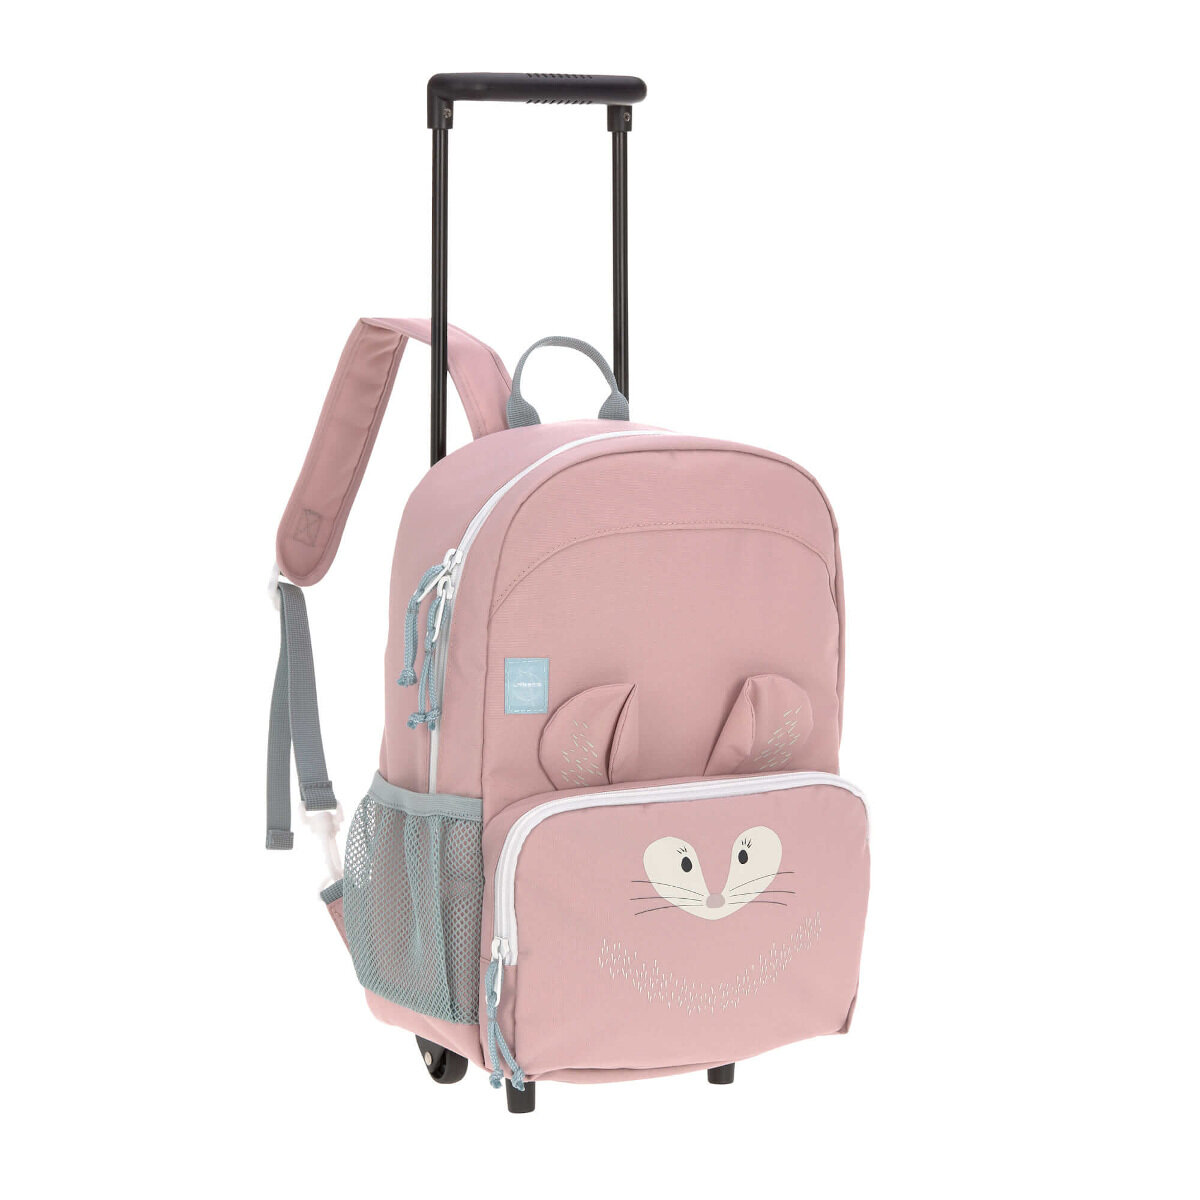 Lässig Trolley/Backpack About Friends Chinchilla, 45,90 €